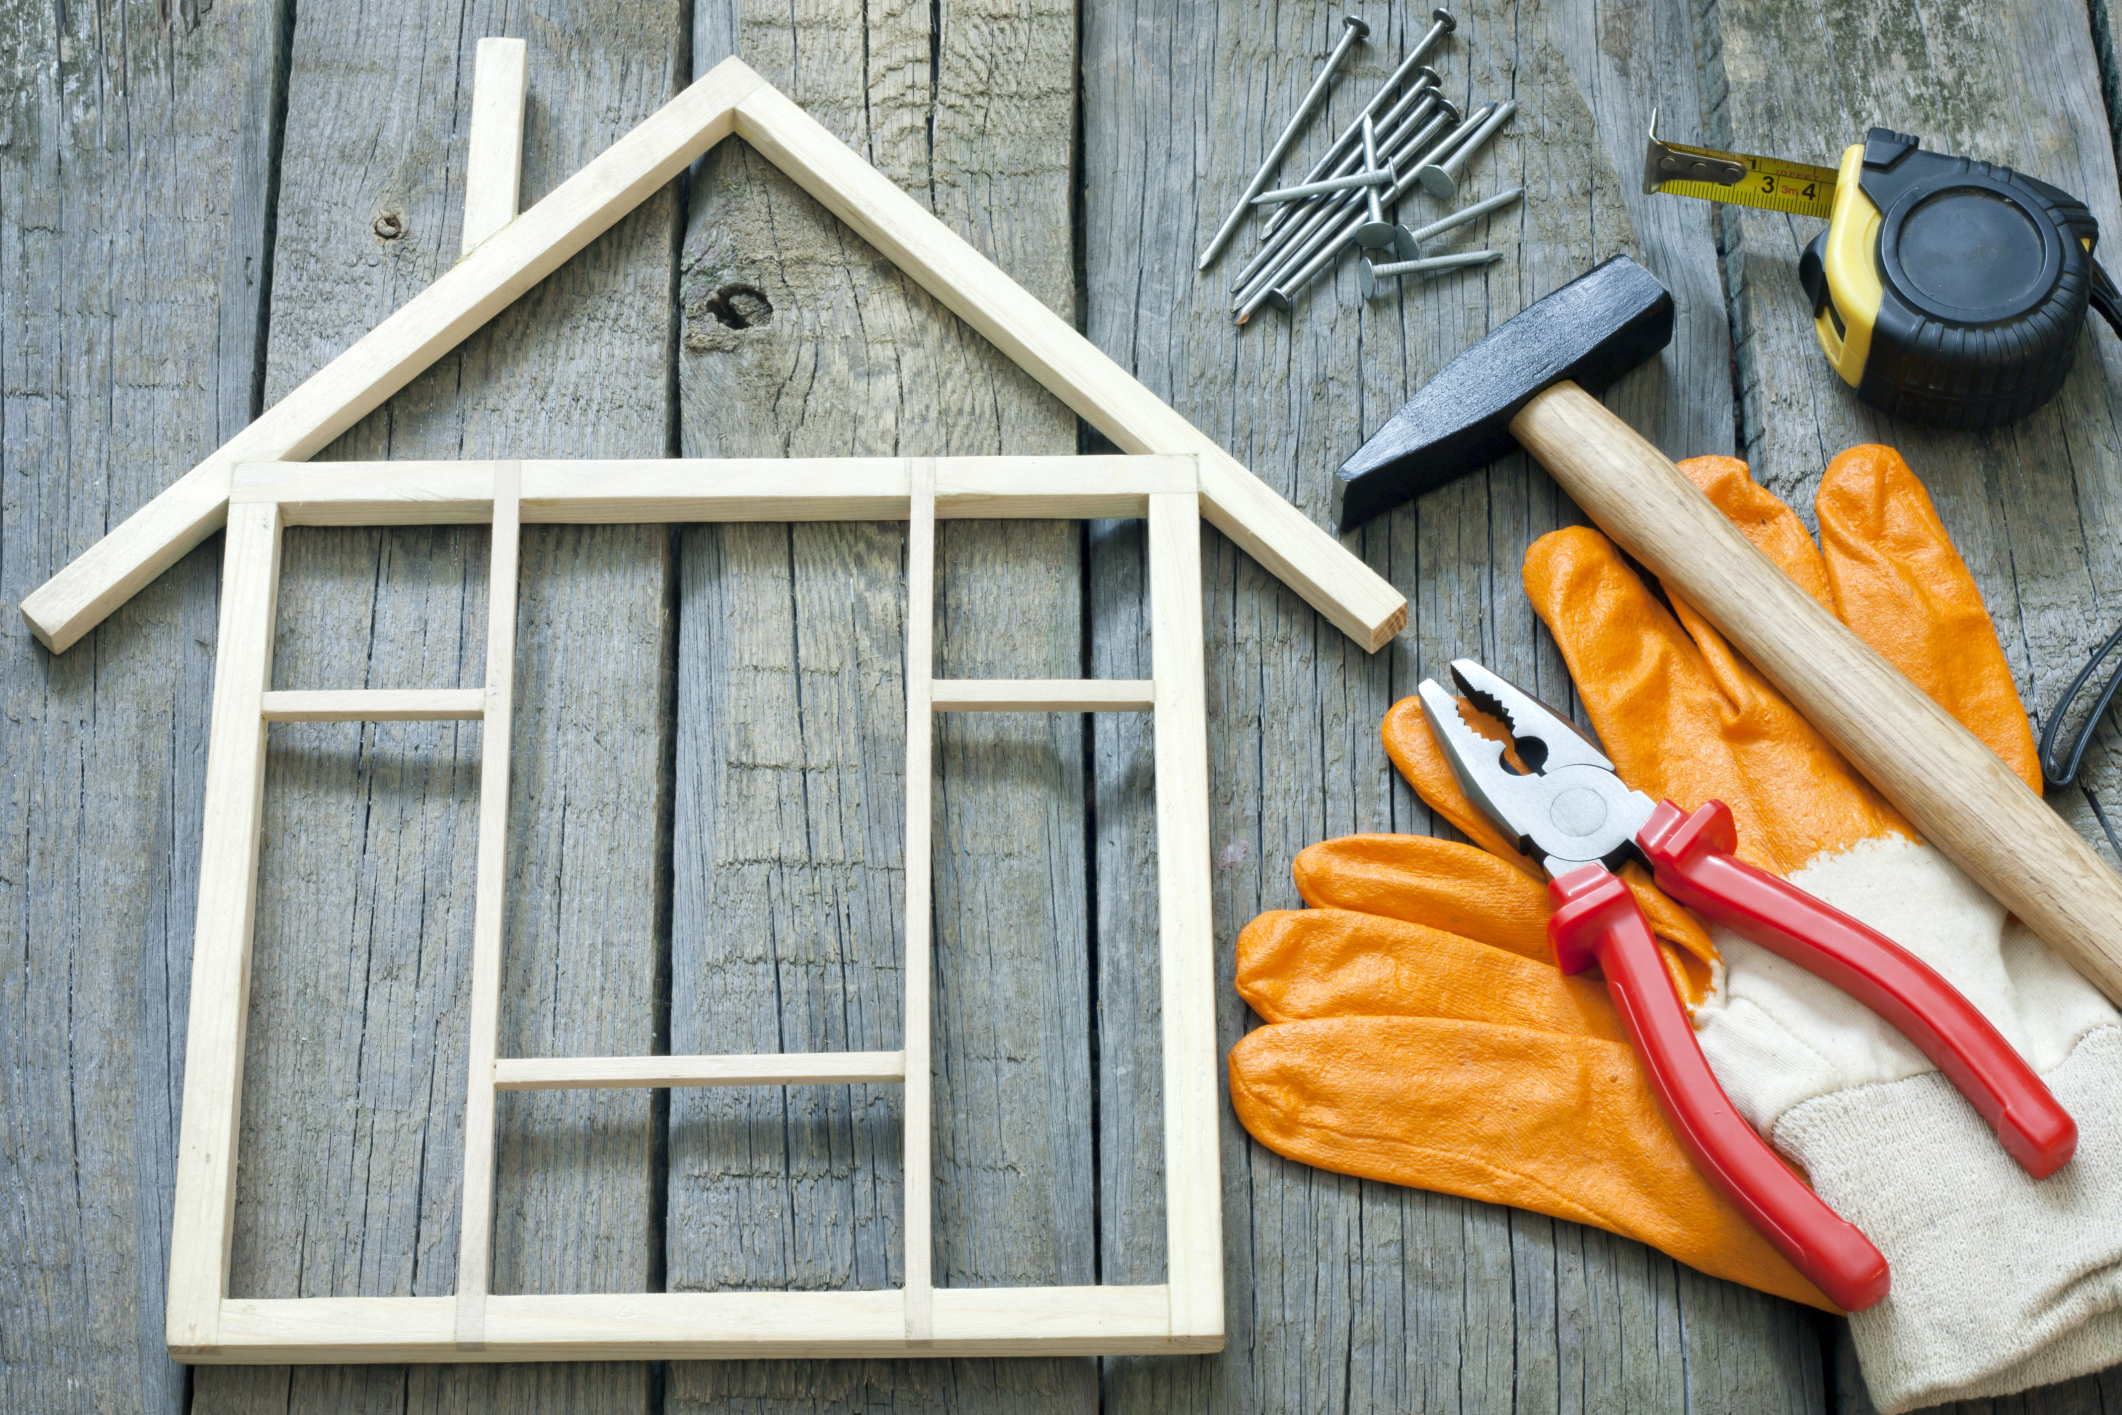 10 outdoor repair and maintenance tasks
that you should never neglect